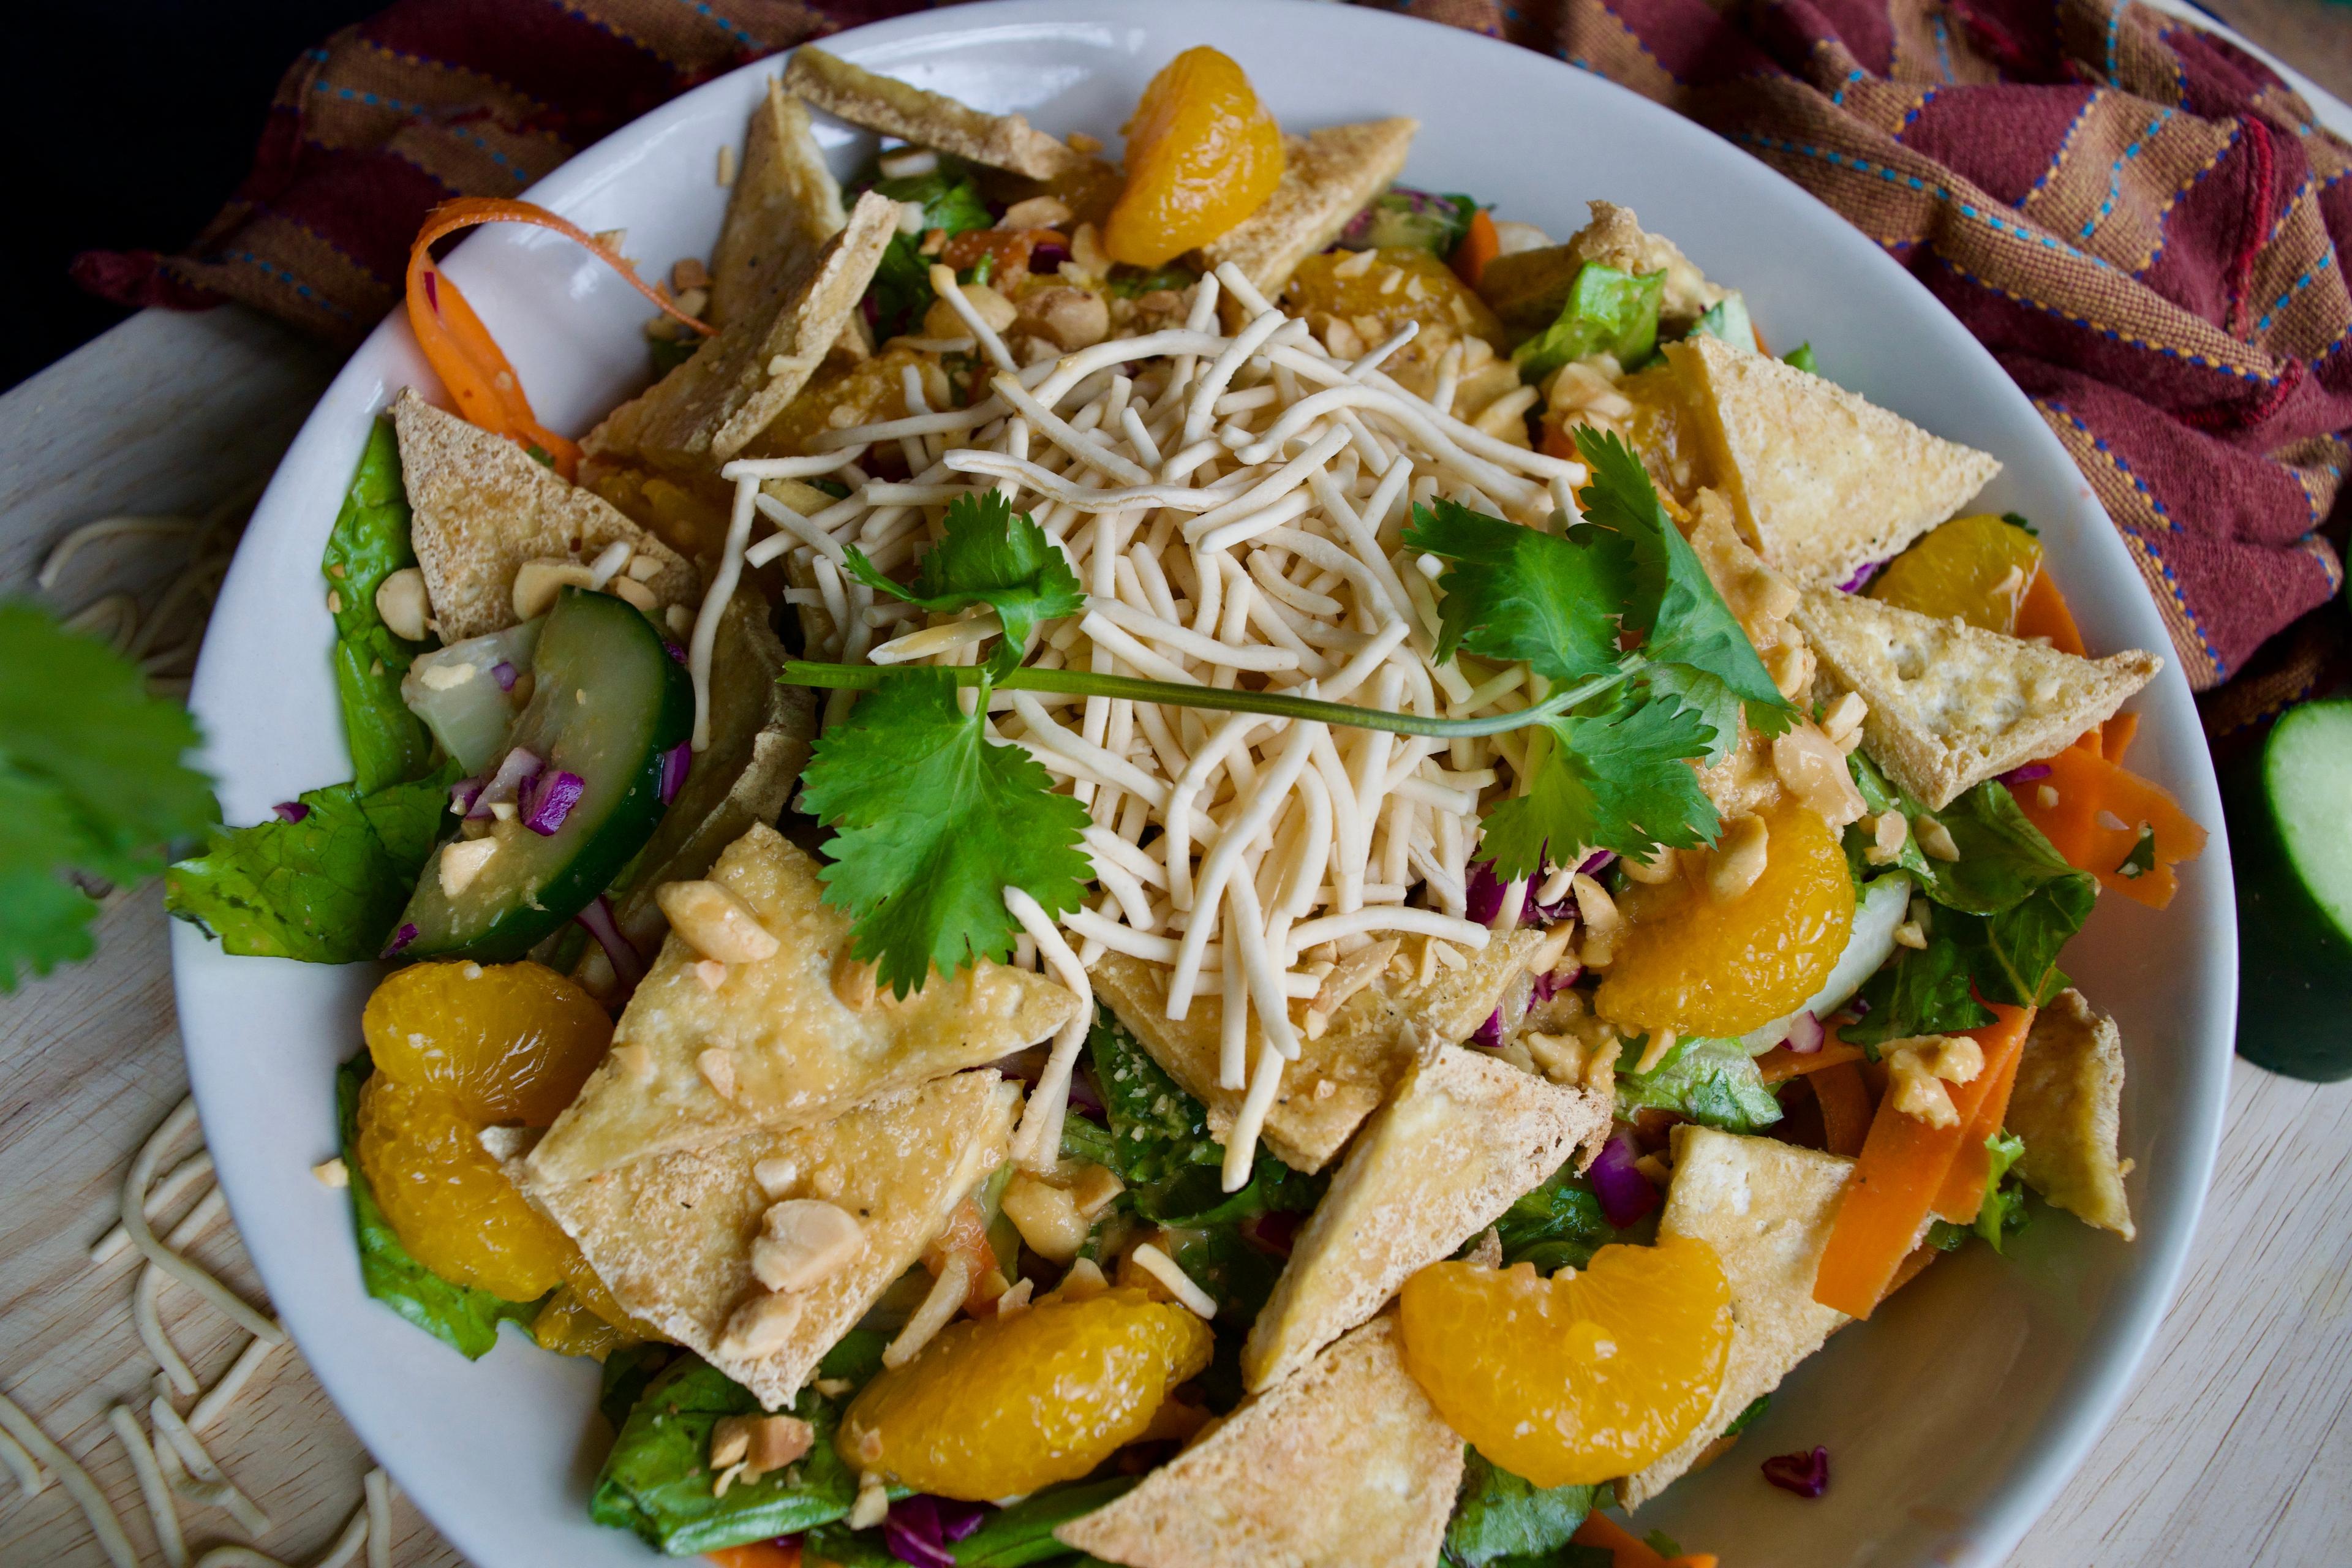 Completed salad close up - fried tofu, mandarin oranges, cucumber, and cilantro are all very visible.